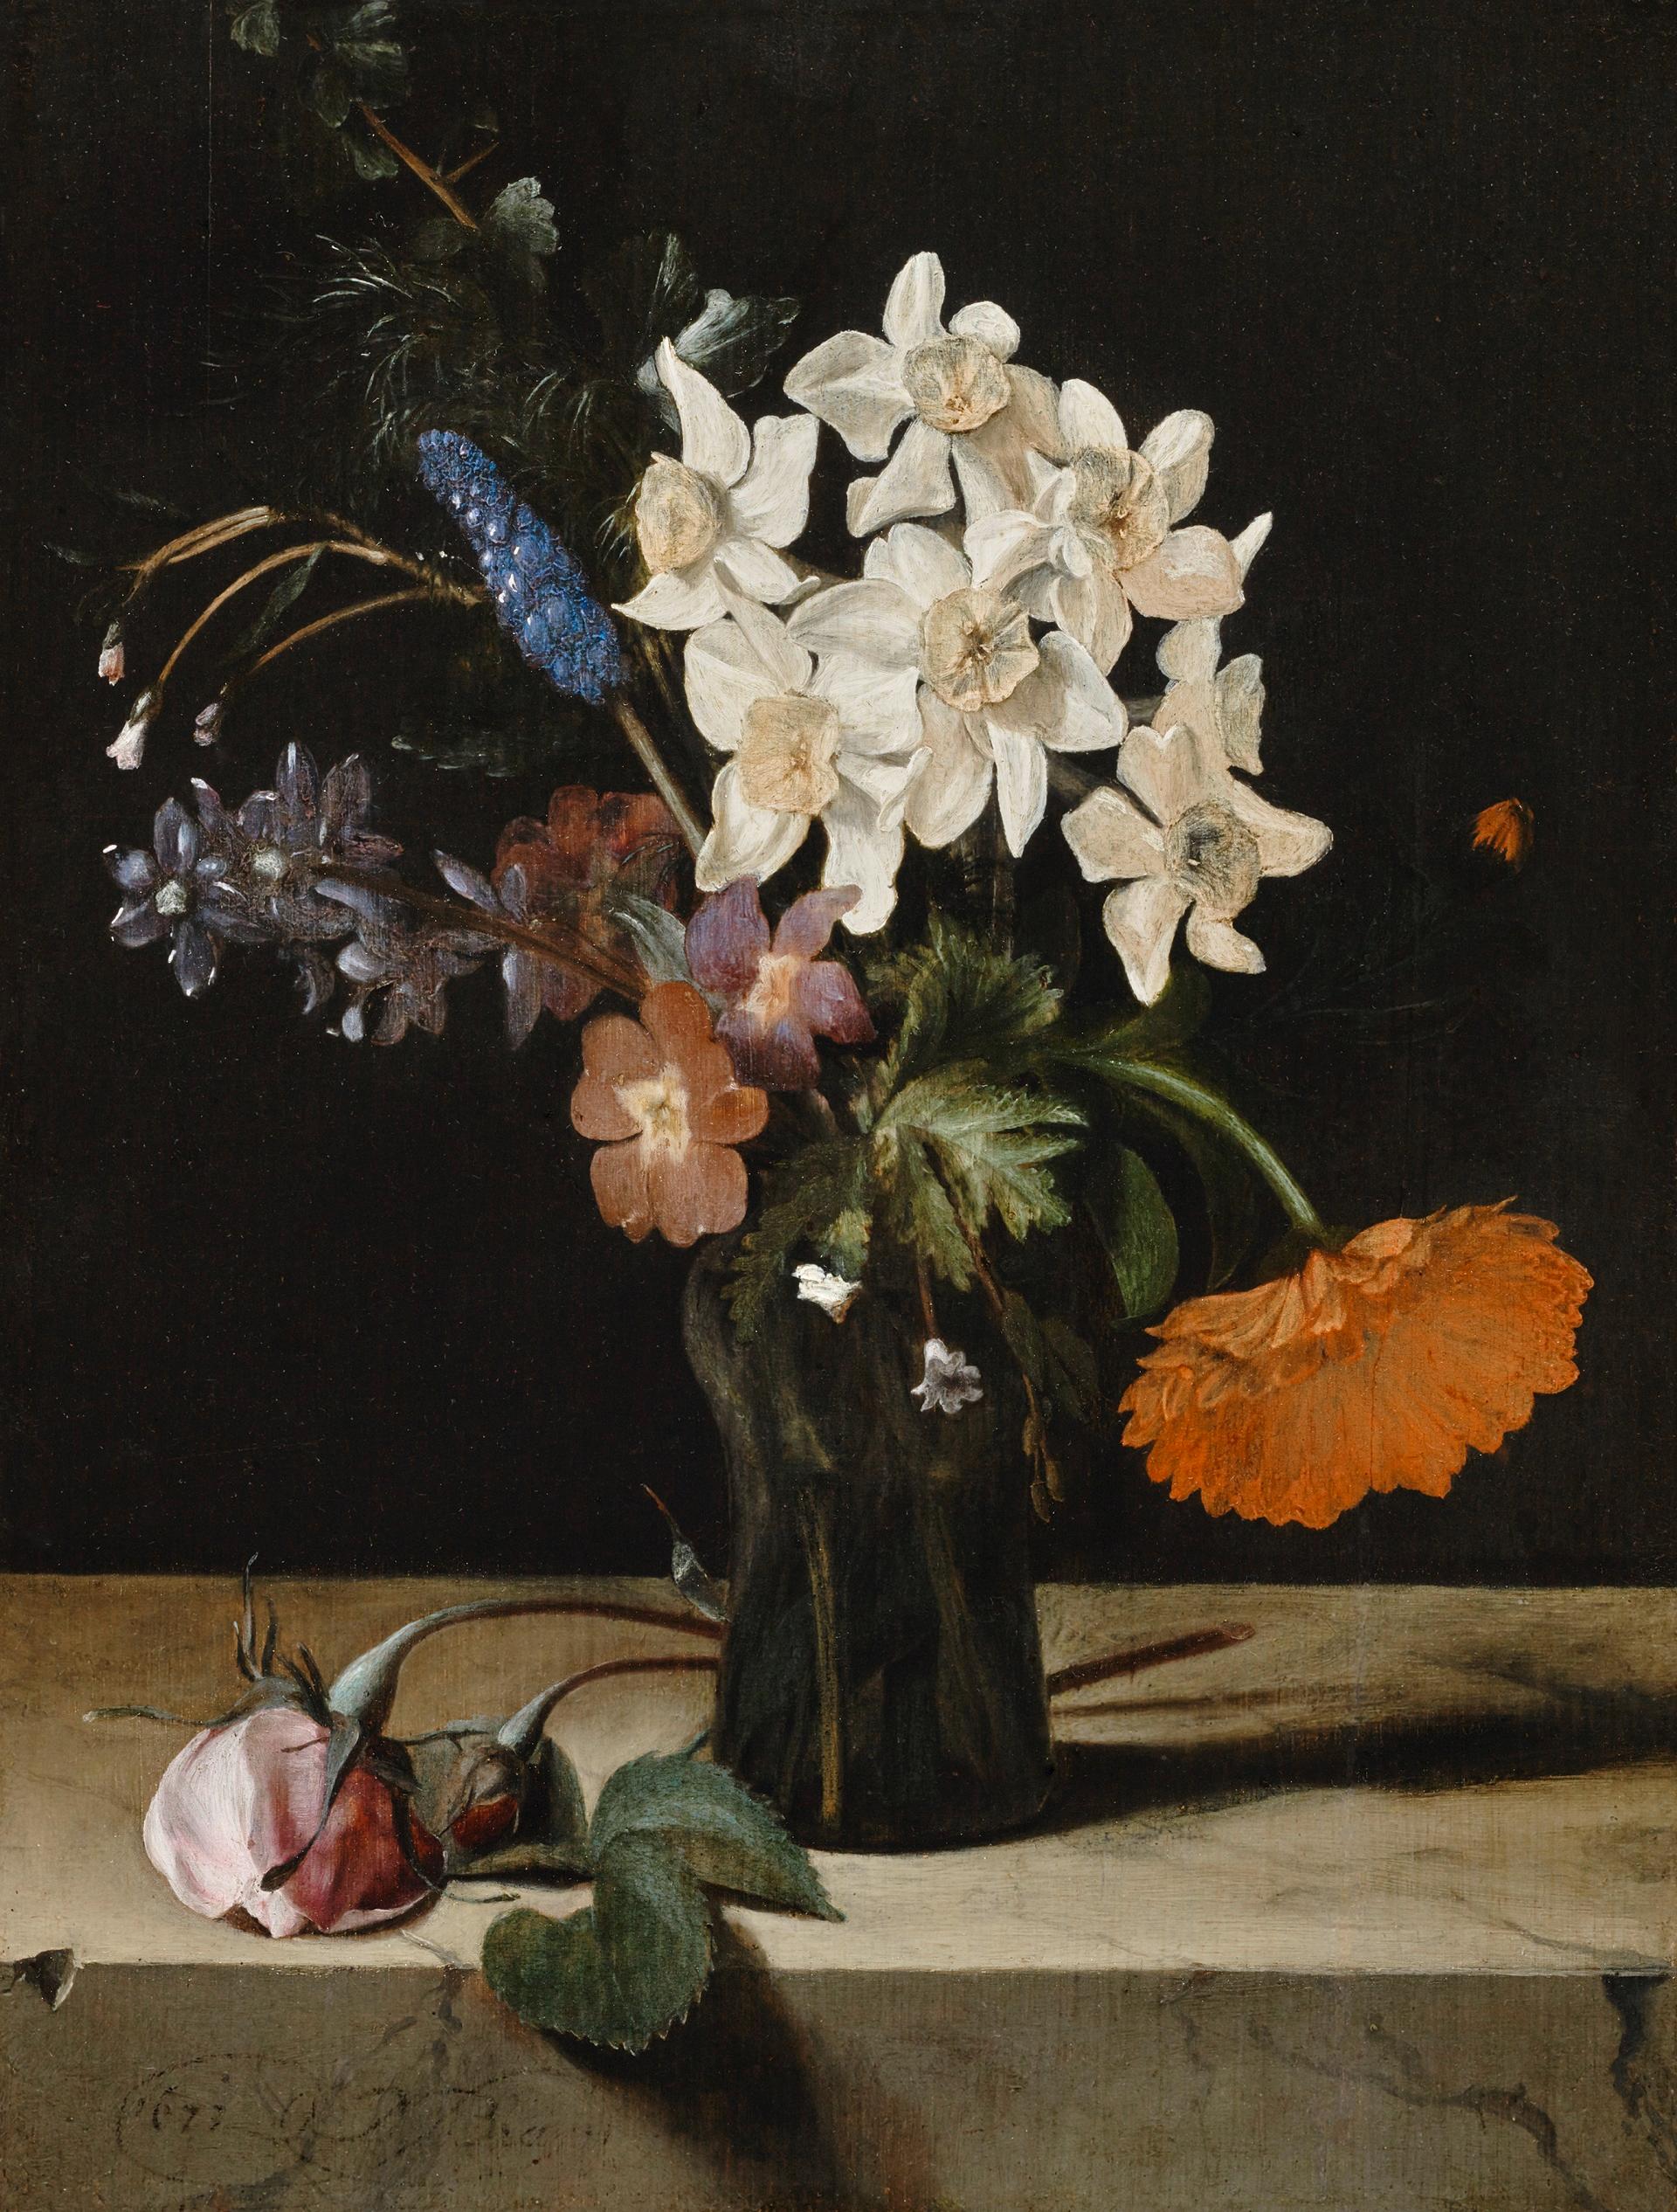 Narcissi and other flowers in a glass vase on a marble plaque by Dirck de Bray